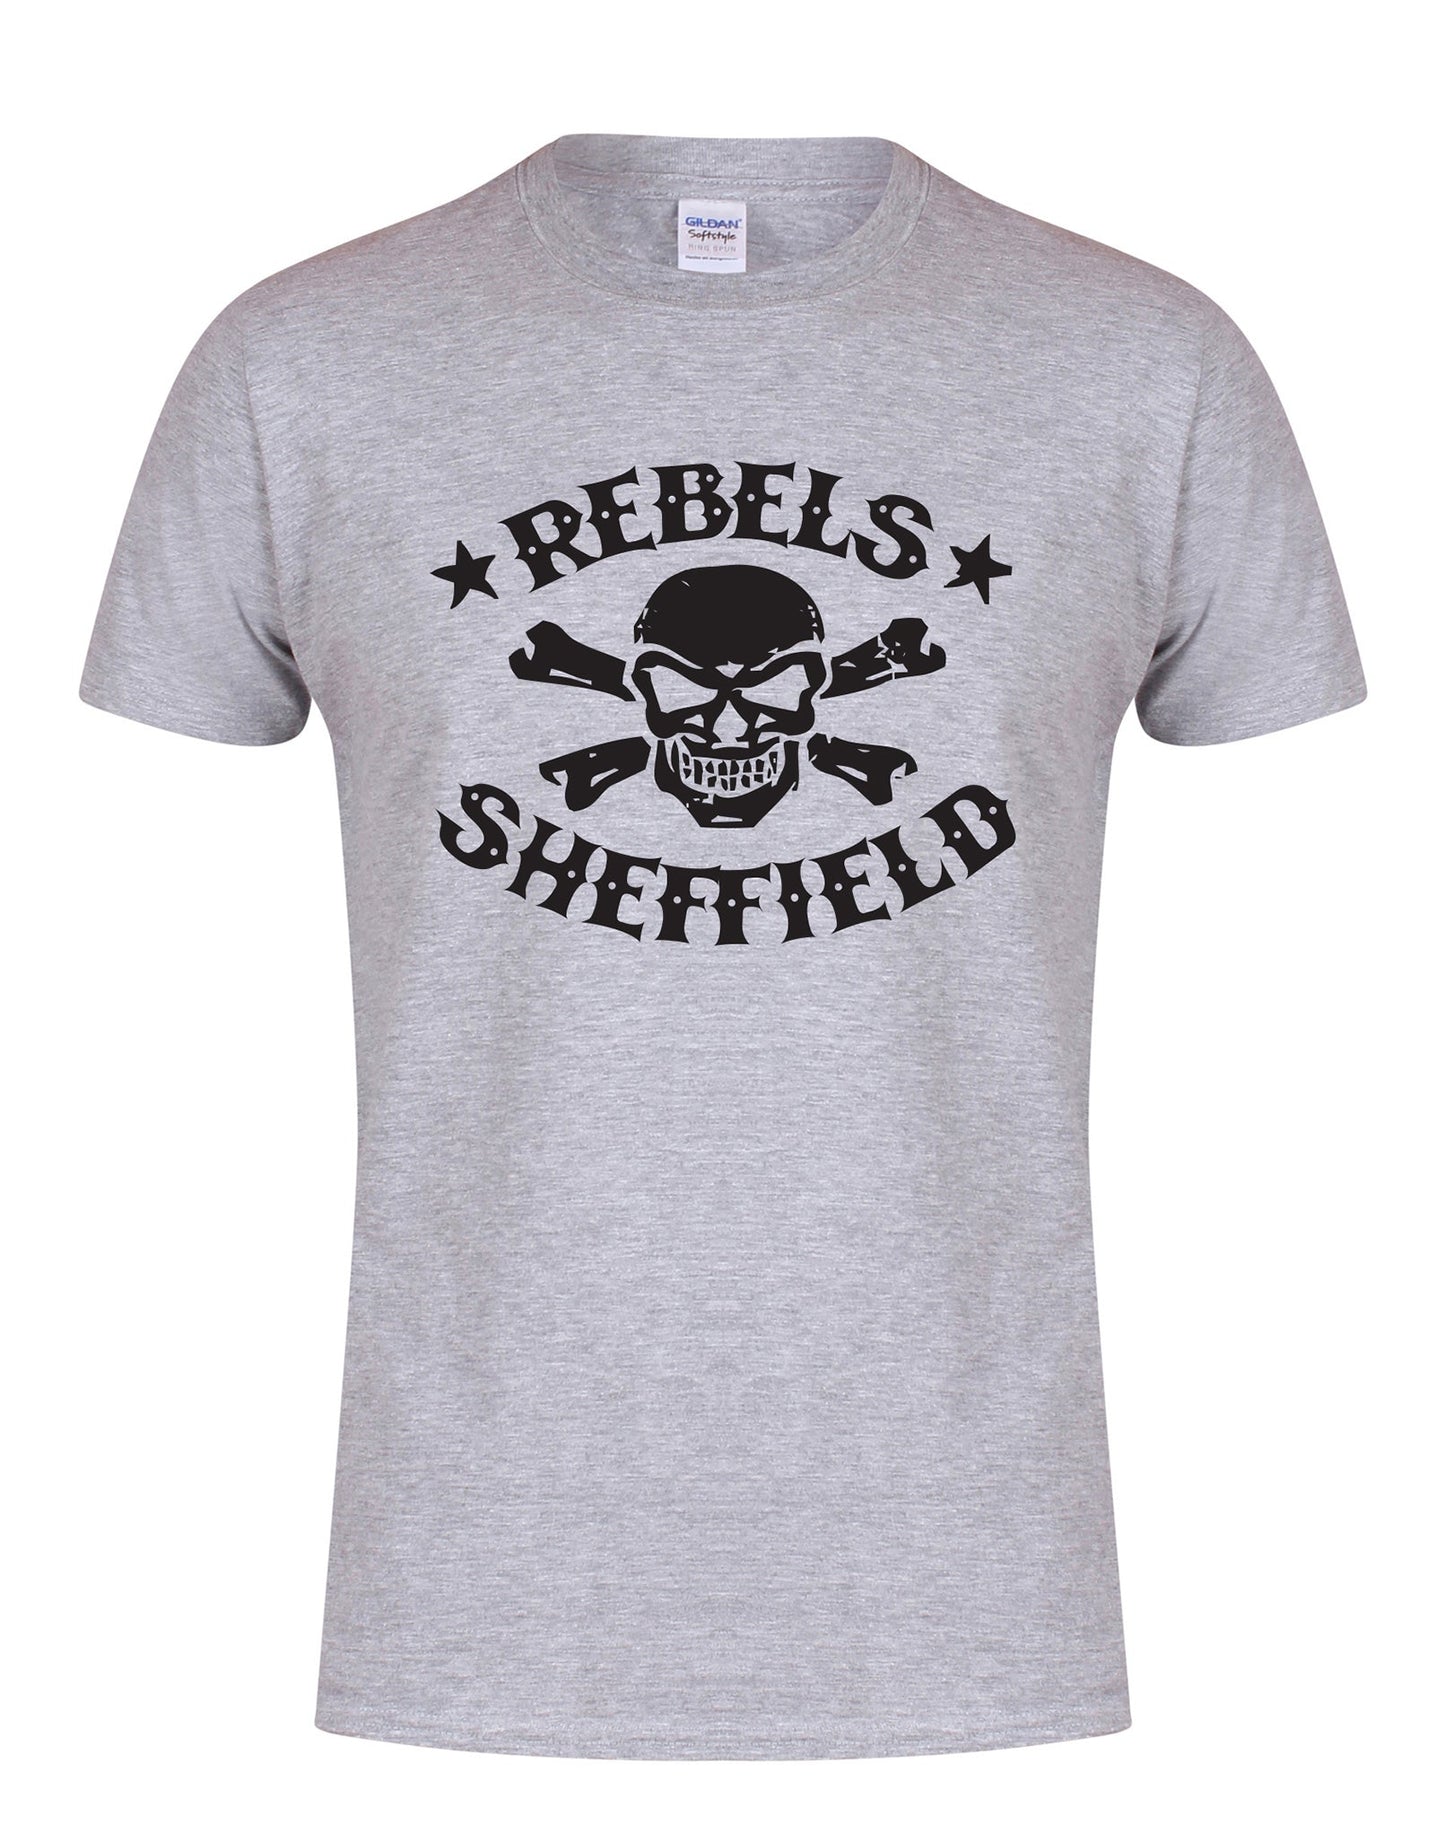 Rebels skull crossbones unisex fit T-shirt - various colours - Dirty Stop Outs